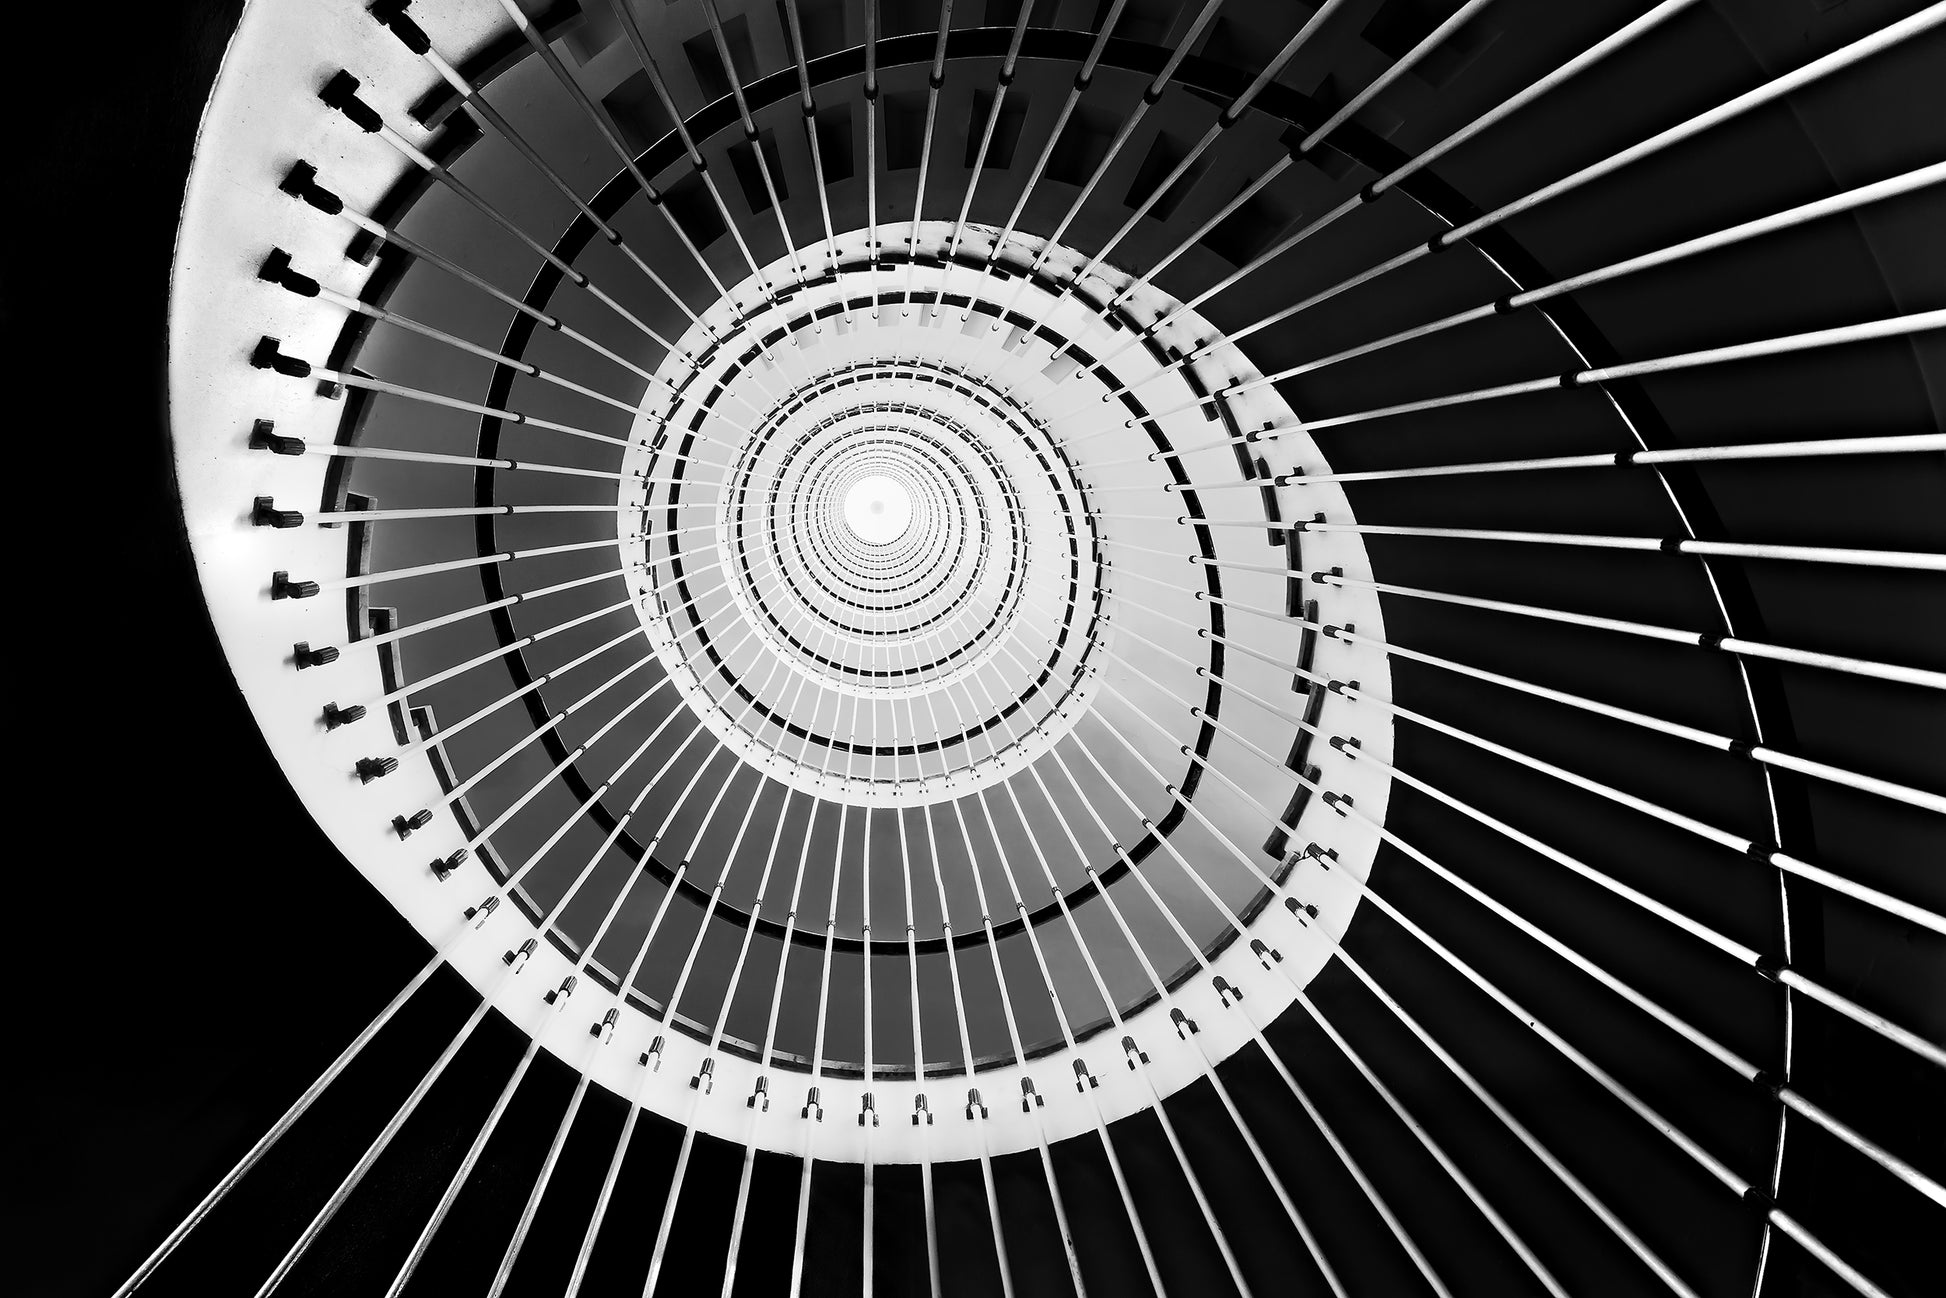 Black and White Architectural Photos: Never Ending Ascent - Equiangular Spiral Staircase Frameable Art Print